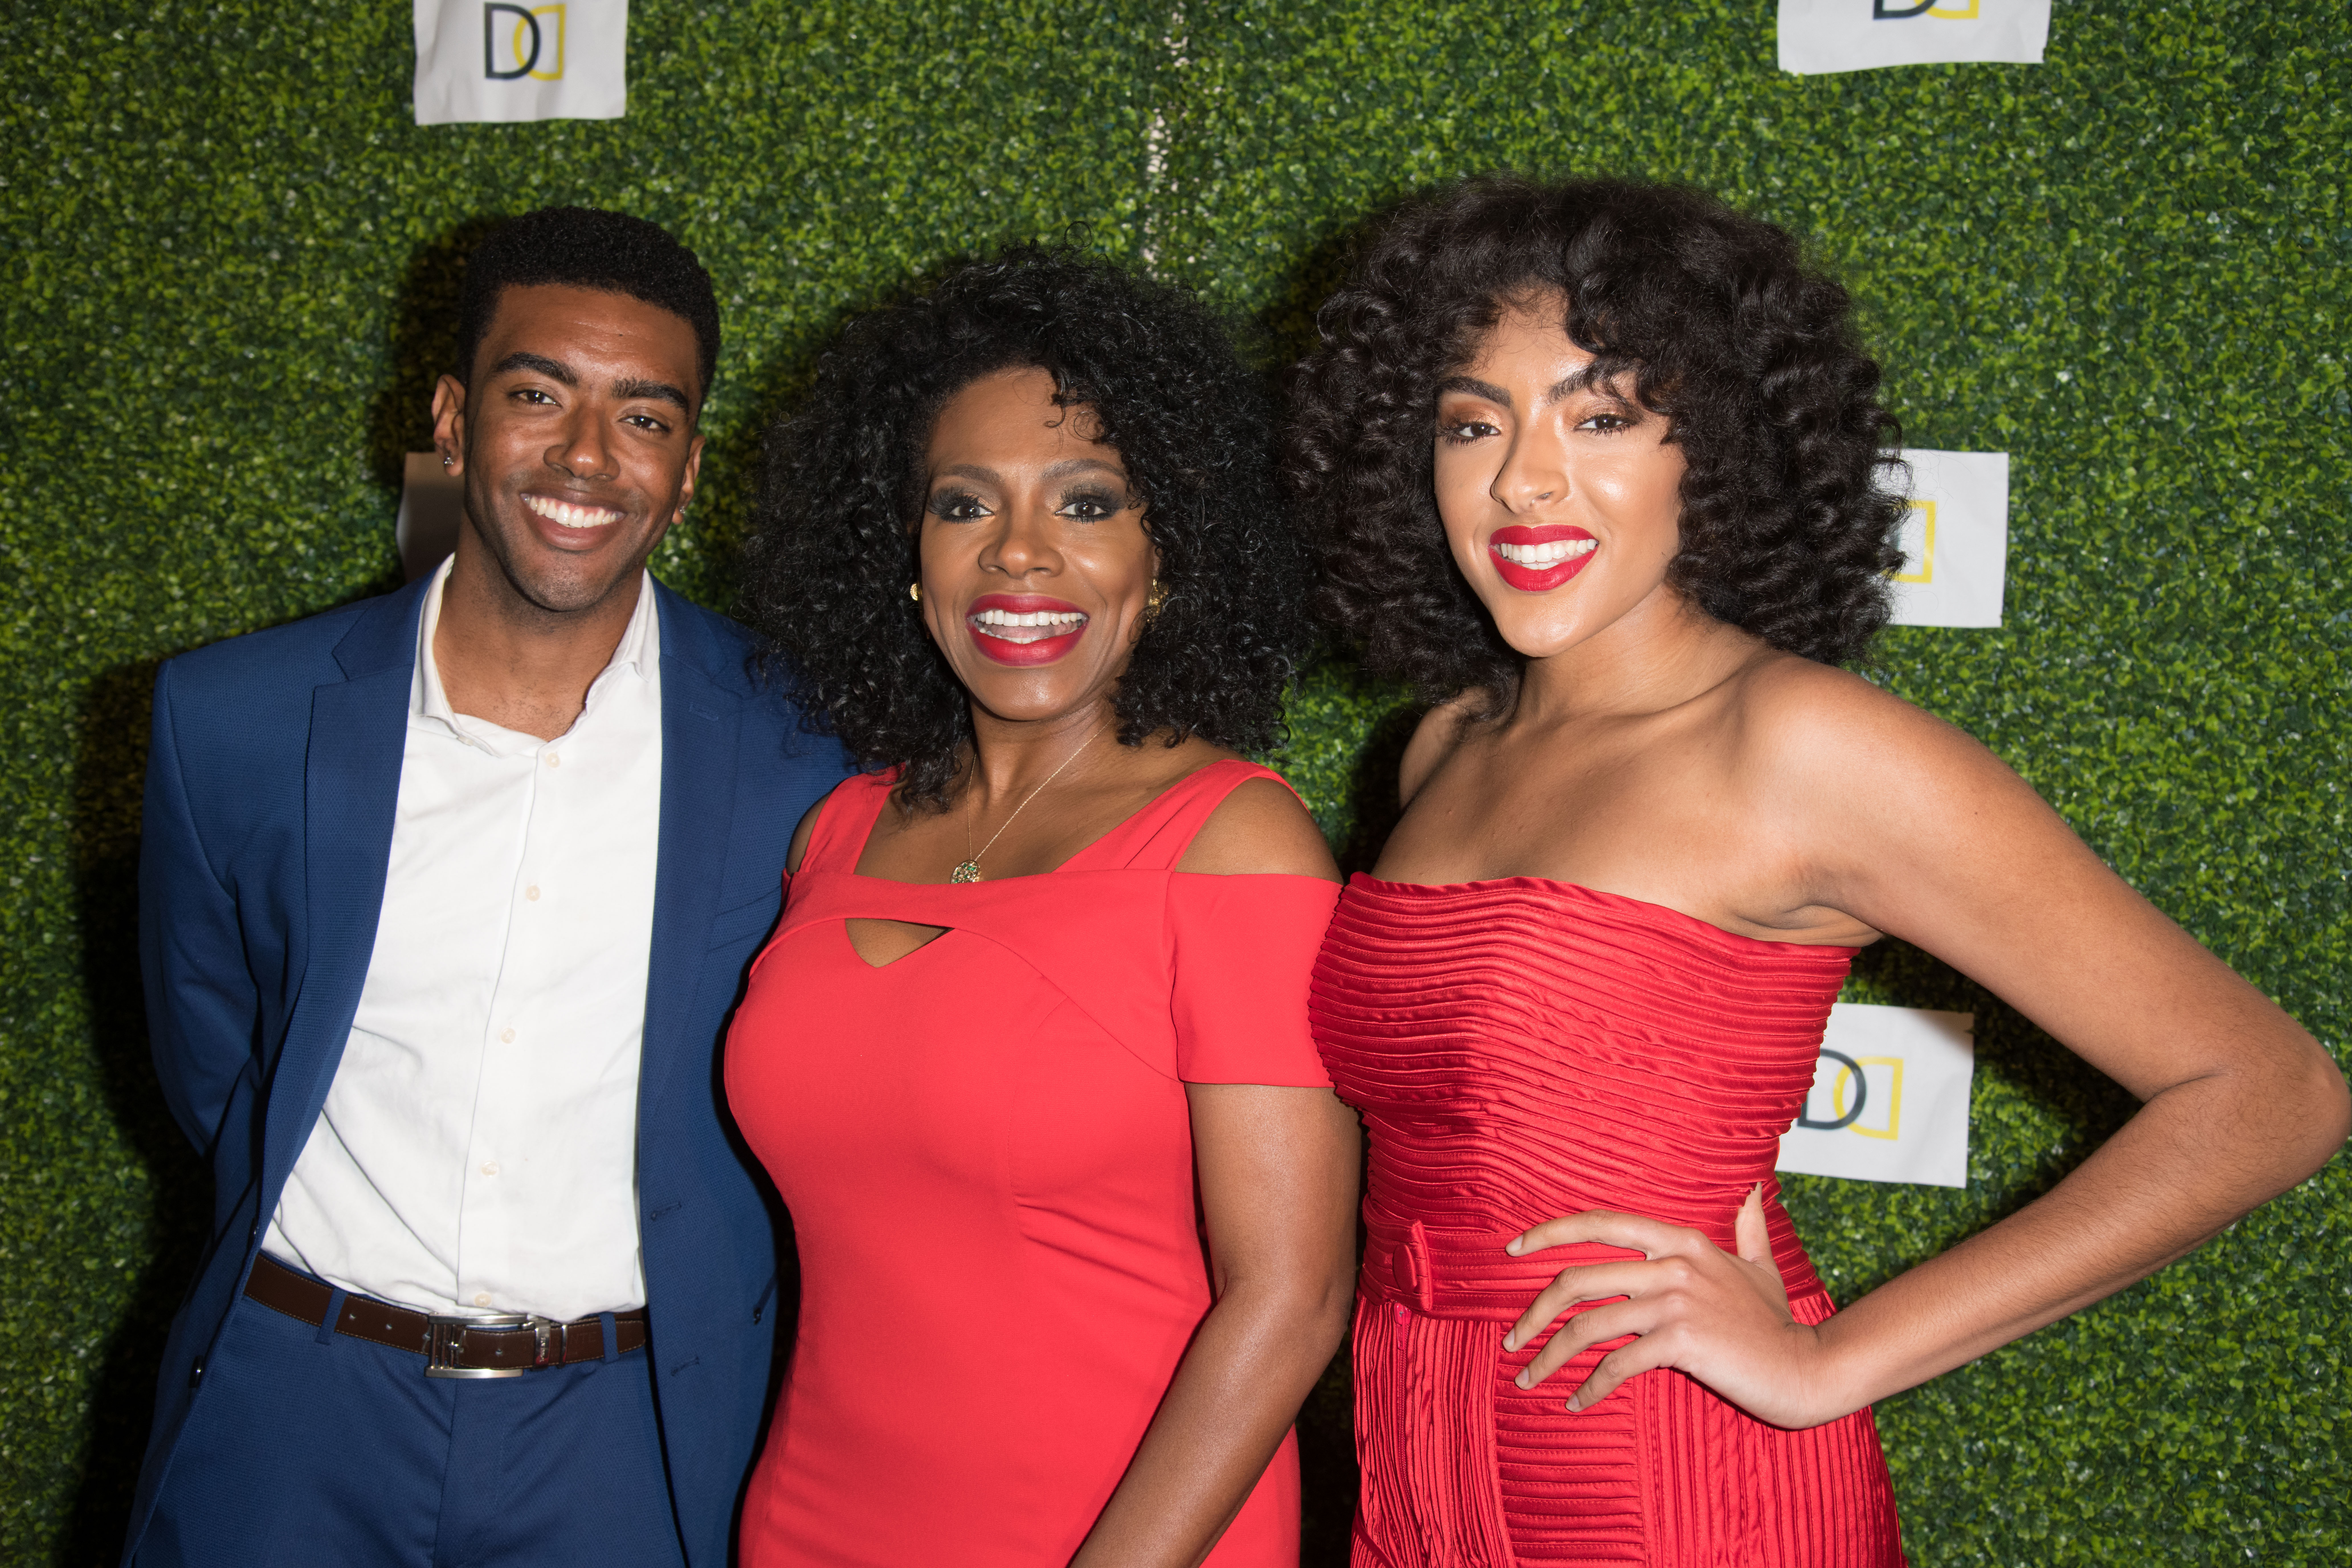 Etienne Maurice, Sheryl Lee Ralph, and Ivy-Victoria Maurice attend "The Diaspora Dialogues" International Women Of Power Luncheon at Marriott Hotel Marina Del Rey on March 2, 2018, in Marina del Rey, California. | Source: Getty Images